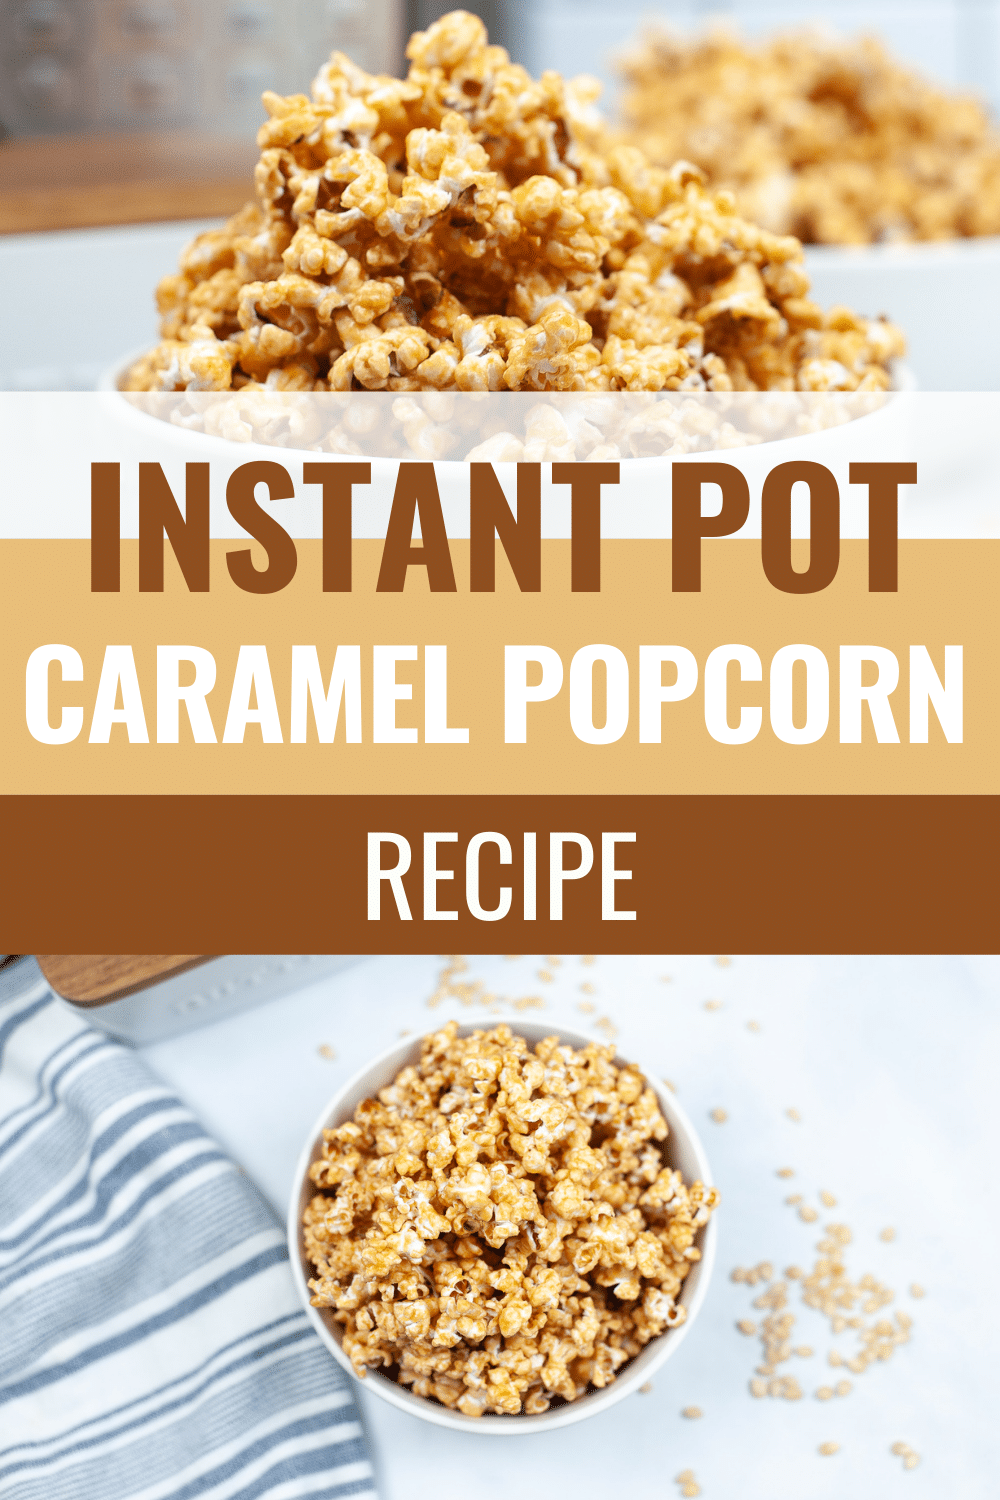 Instant Pot Caramel Popcorn is the perfect sweet and salty snack. It's easy to make and only takes a few minutes in the Instant Pot. #instantpot #pressurecooker #caramelpopcorn #popcorn #recipe via @wondermomwannab